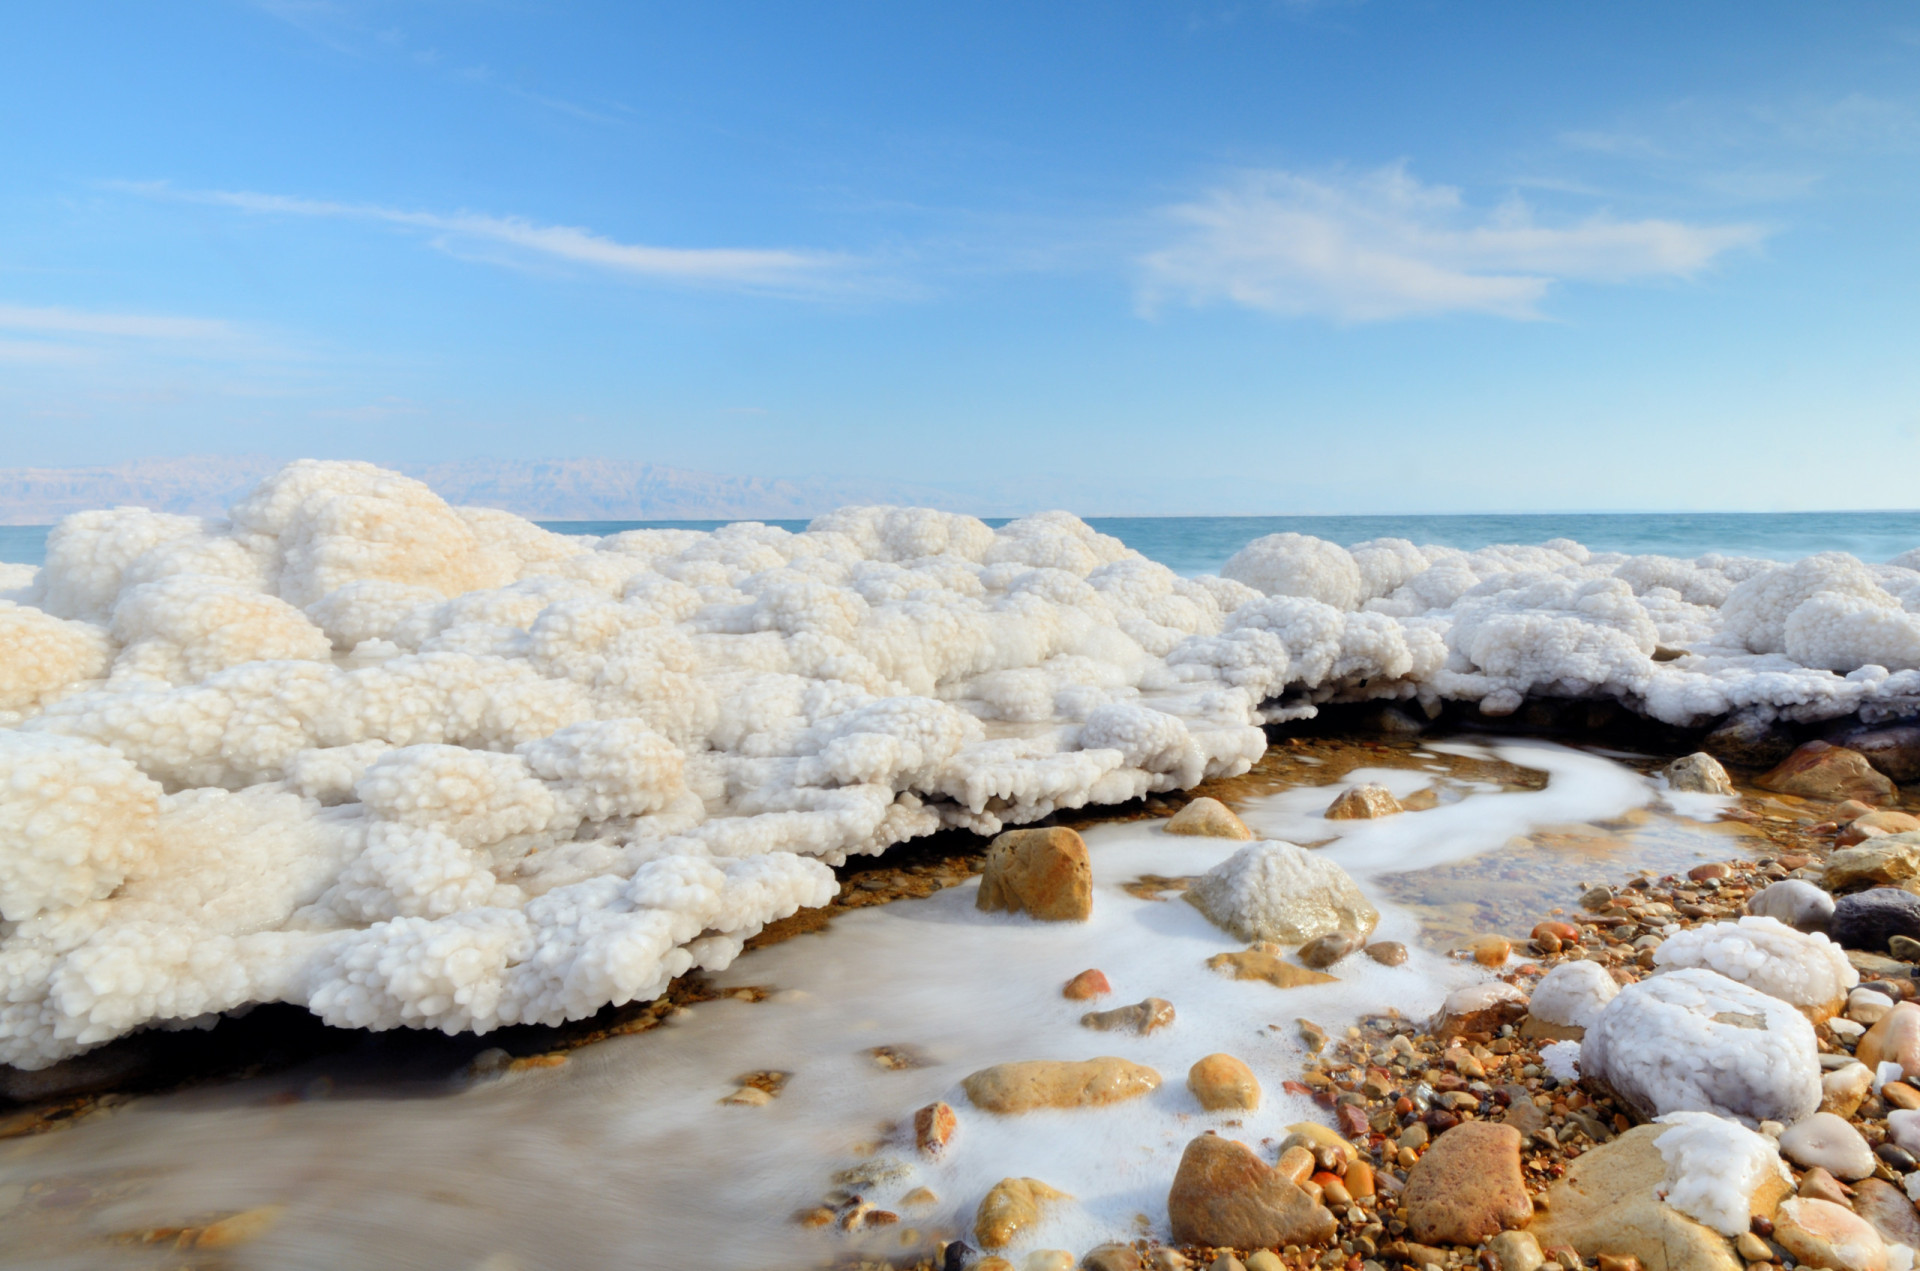 <p>Scientists have known for decades that the Dead Sea isn't entirely bereft of life. In certain areas, microorganisms representing several different species carpet the seafloor.</p><p>You may also like:<a href="https://www.starsinsider.com/n/478774?utm_source=msn.com&utm_medium=display&utm_campaign=referral_description&utm_content=573453en-en"> Celebrities who were cheated on</a></p>